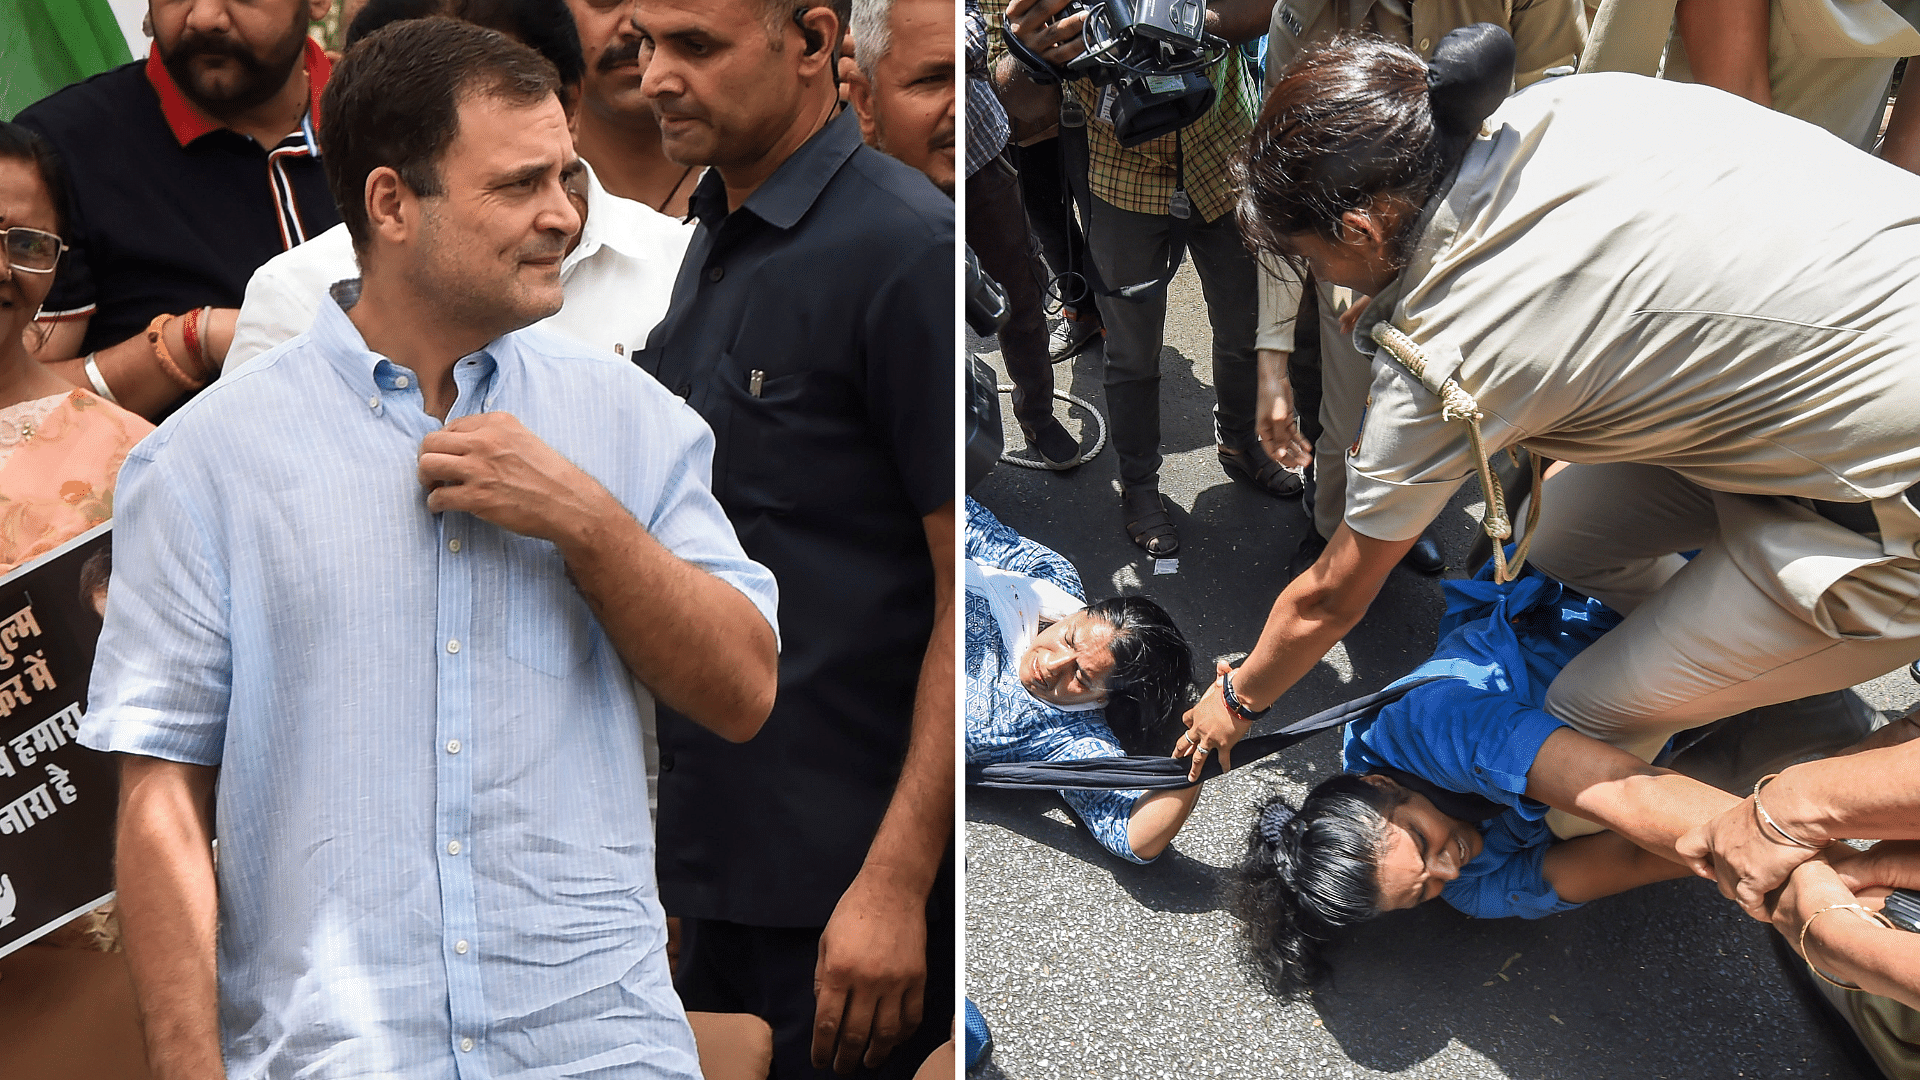 <div class="paragraphs"><p>Congress leader <a href="https://www.thequint.com/news/politics/rahul-gandhi-appearance-enforcement-directorate-national-herald-money-laundering-congress-rally#read-more">Rahul Gandhi</a> reached the Enforcement Directorate office for <a href="https://www.thequint.com/news/politics/rahul-gandhi-appearance-enforcement-directorate-national-herald-money-laundering-congress-rally">questioning</a> once again on Wednesday, 15 June – for the third day in a row.</p></div>